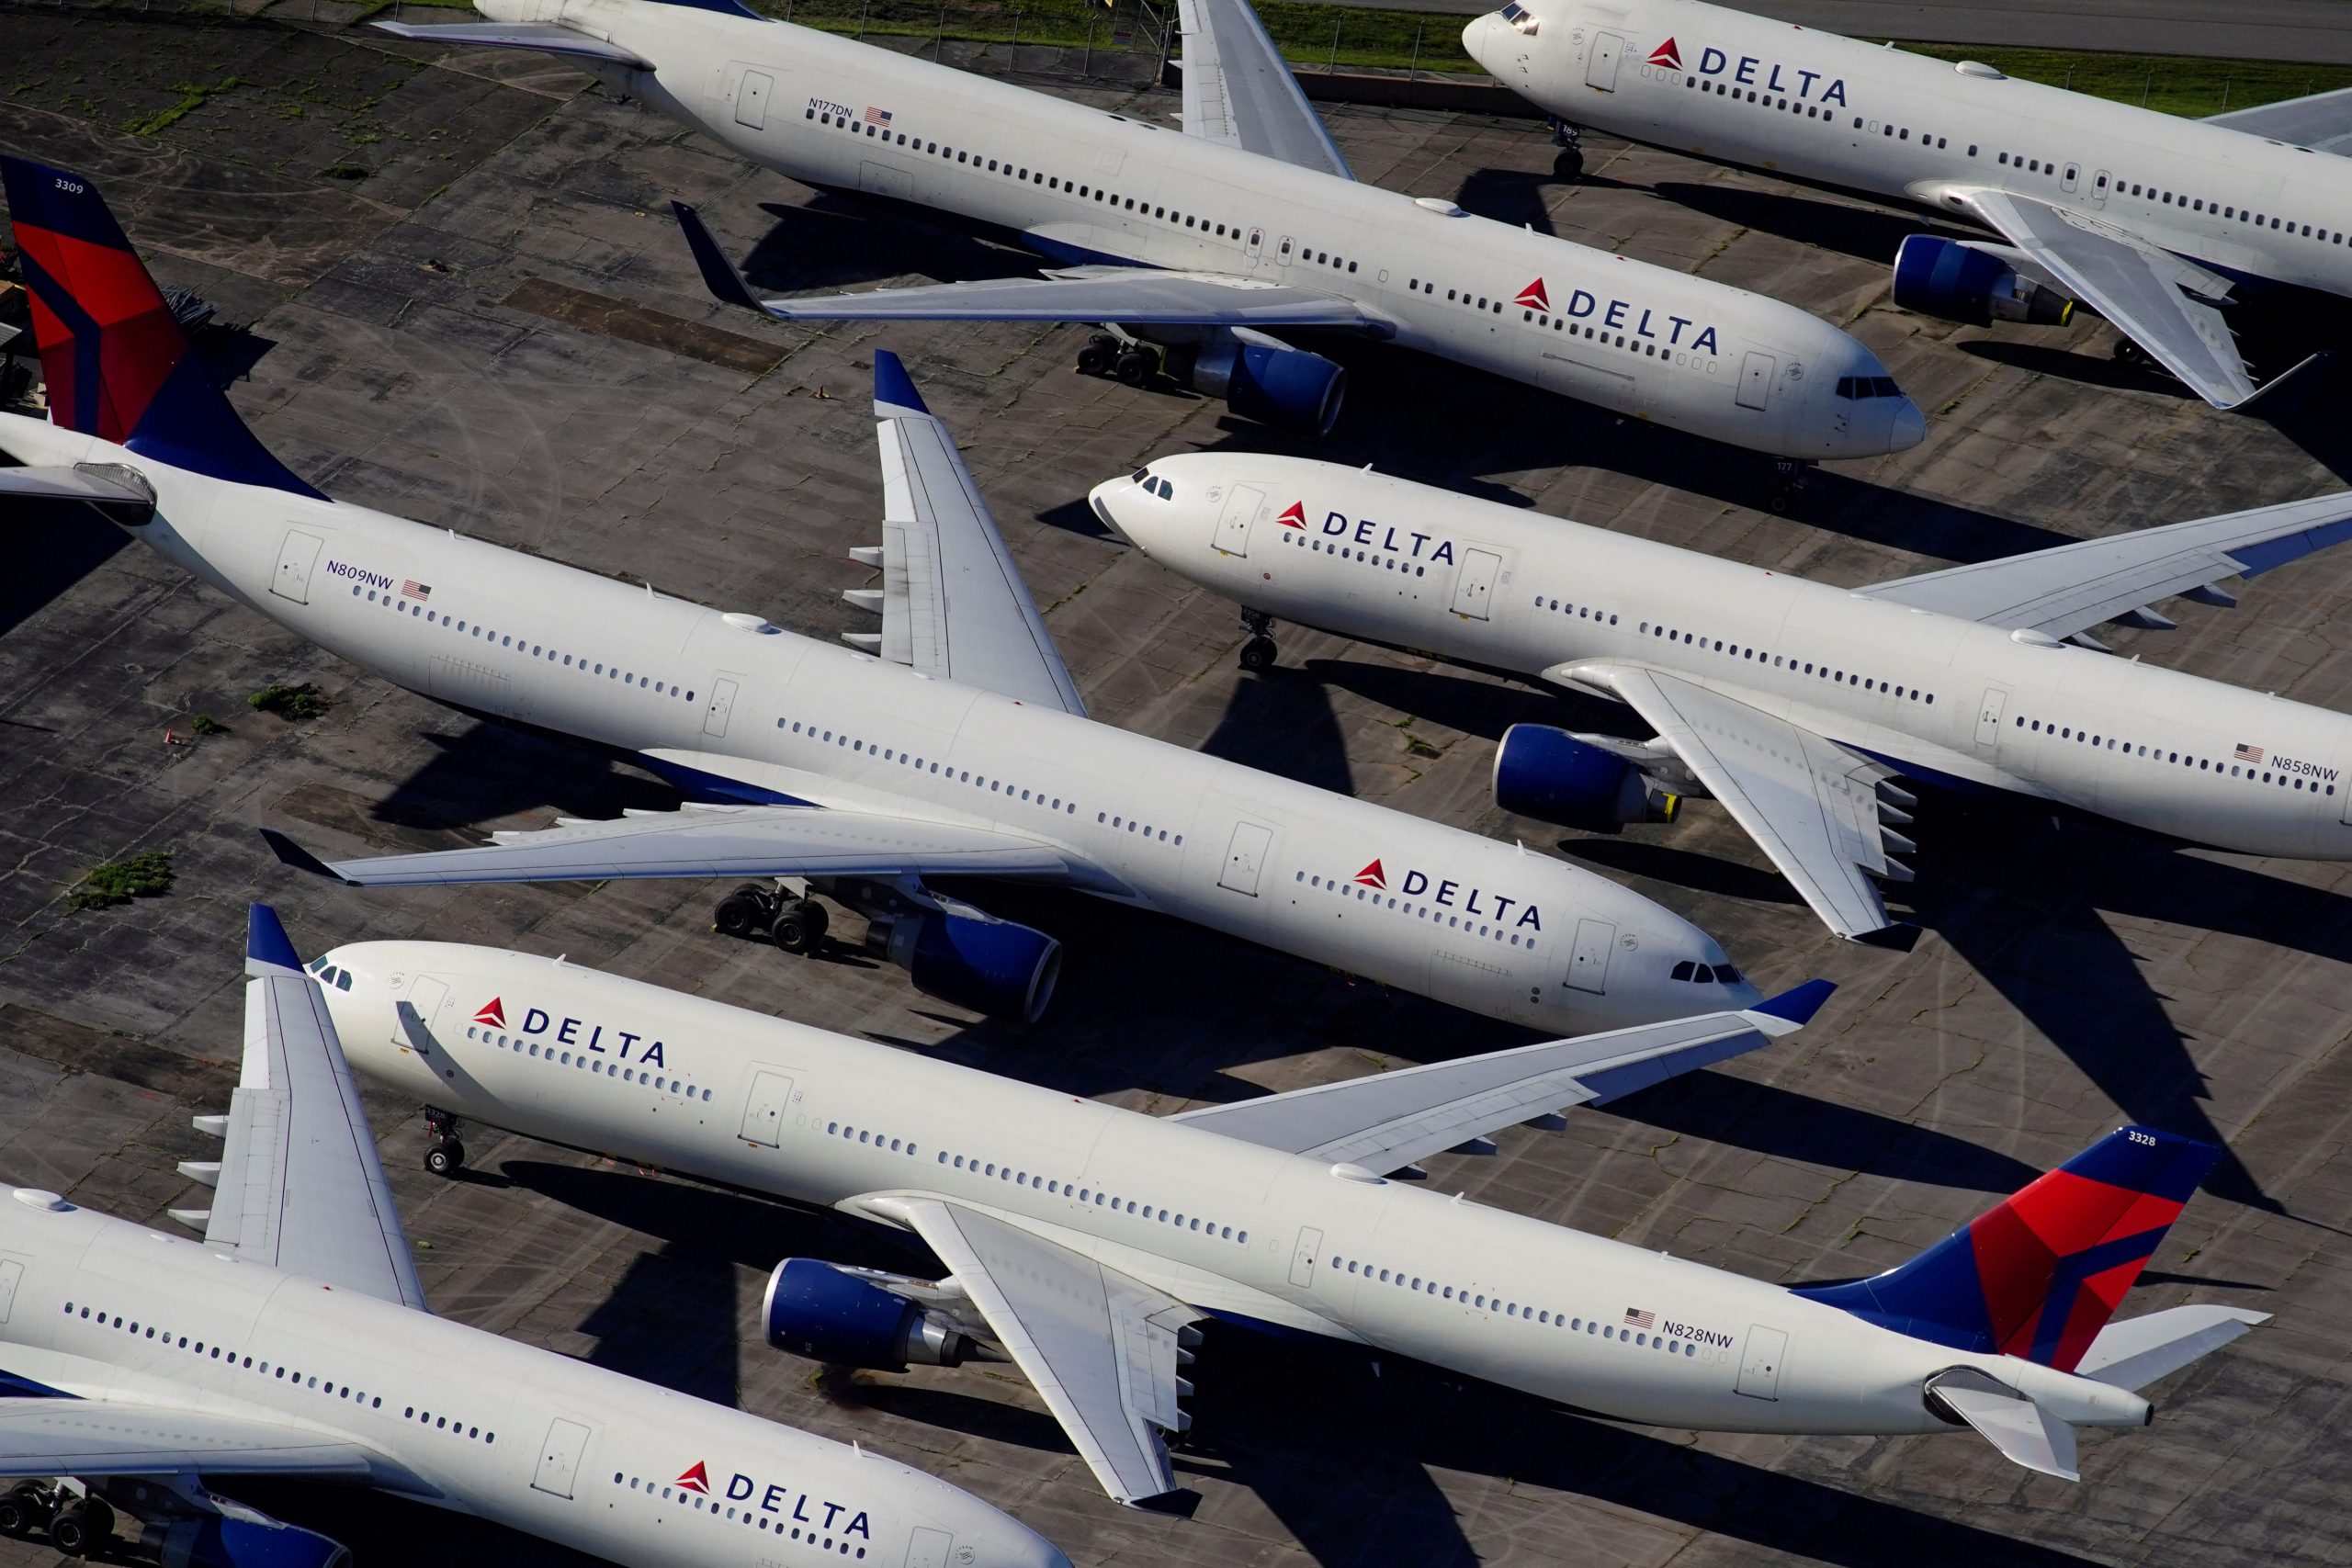 FILE PHOTO: Delta Air Lines passenger planes are seen parked due to flight reductions made to slow the spread of coronavirus disease (COVID-19), at Birmingham-Shuttlesworth International Airport in Birmingham, Alabama, U.S. March 25, 2020.  REUTERS/Elijah Nouvelage/File Photo